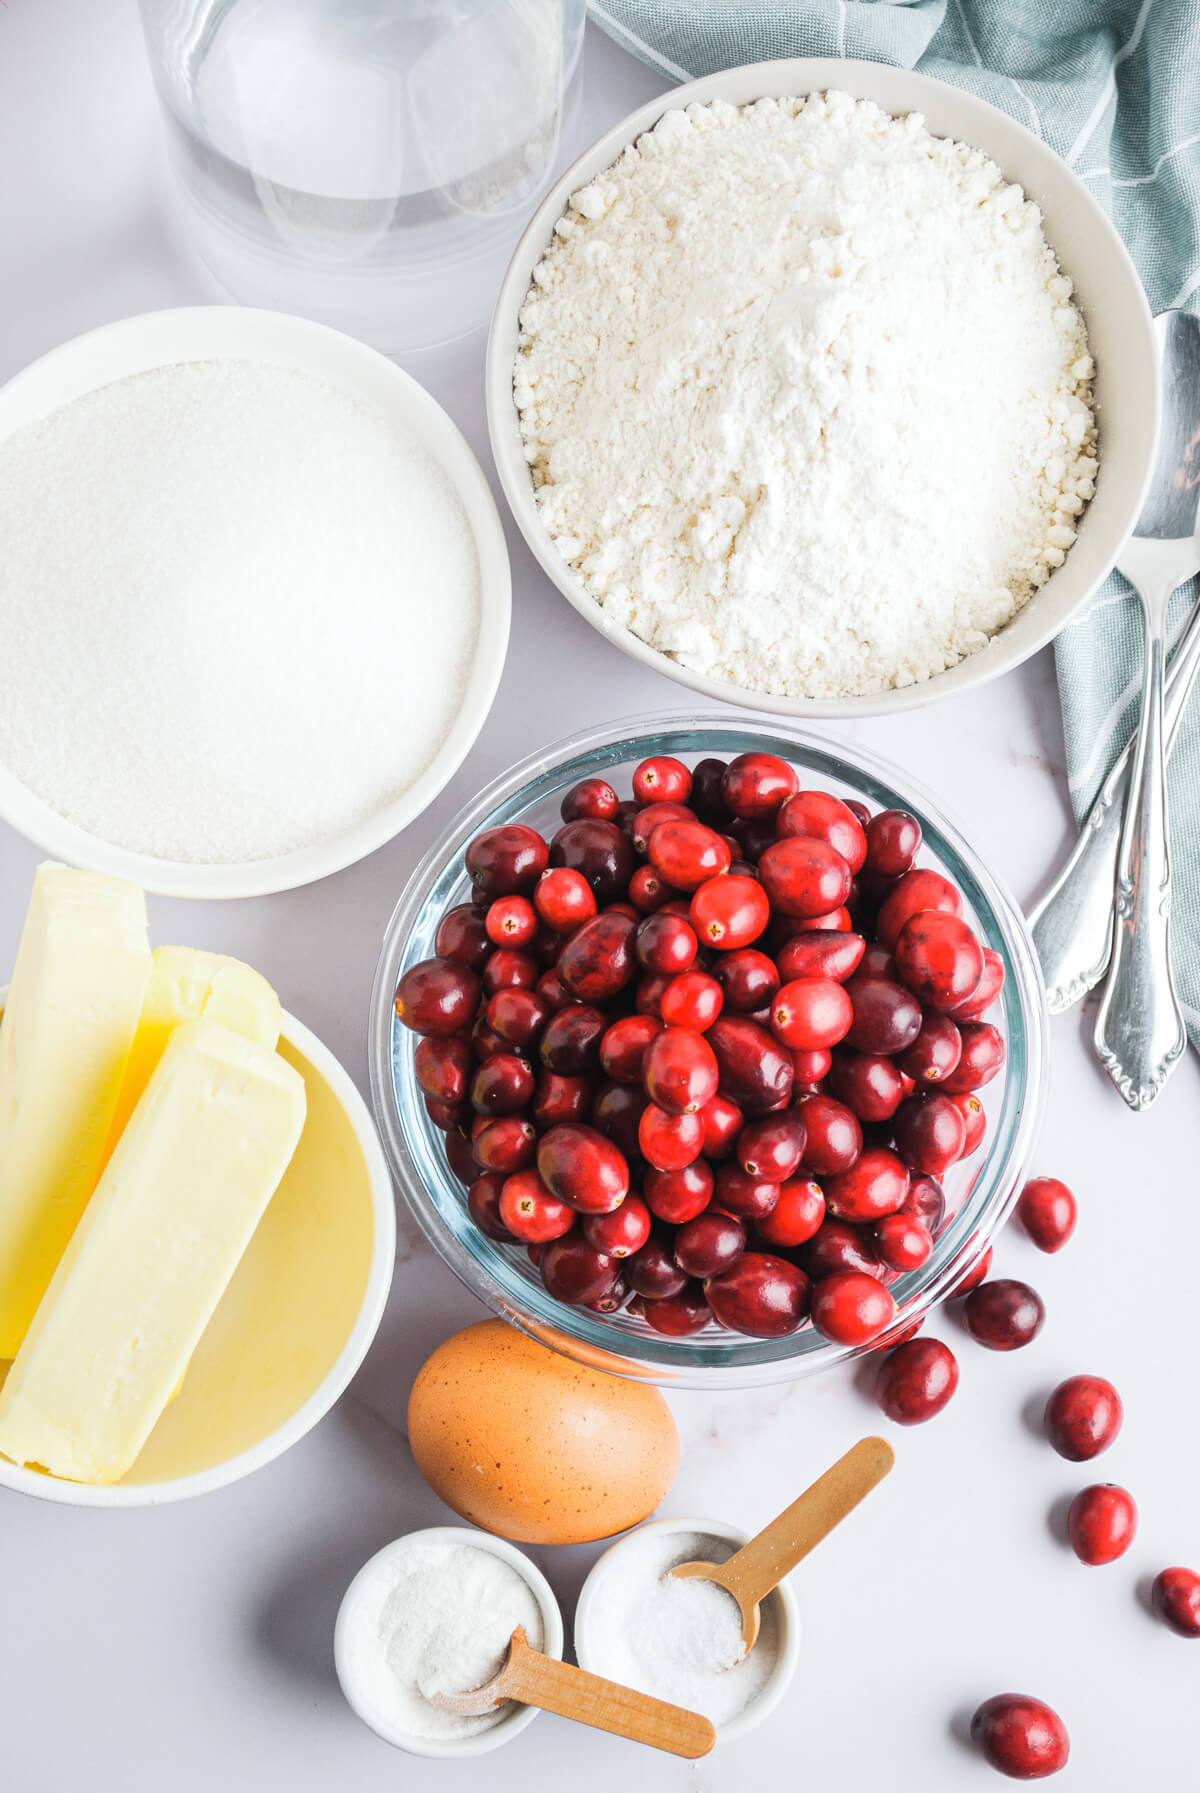 Ingredients needed to bake Cranberry Bars.